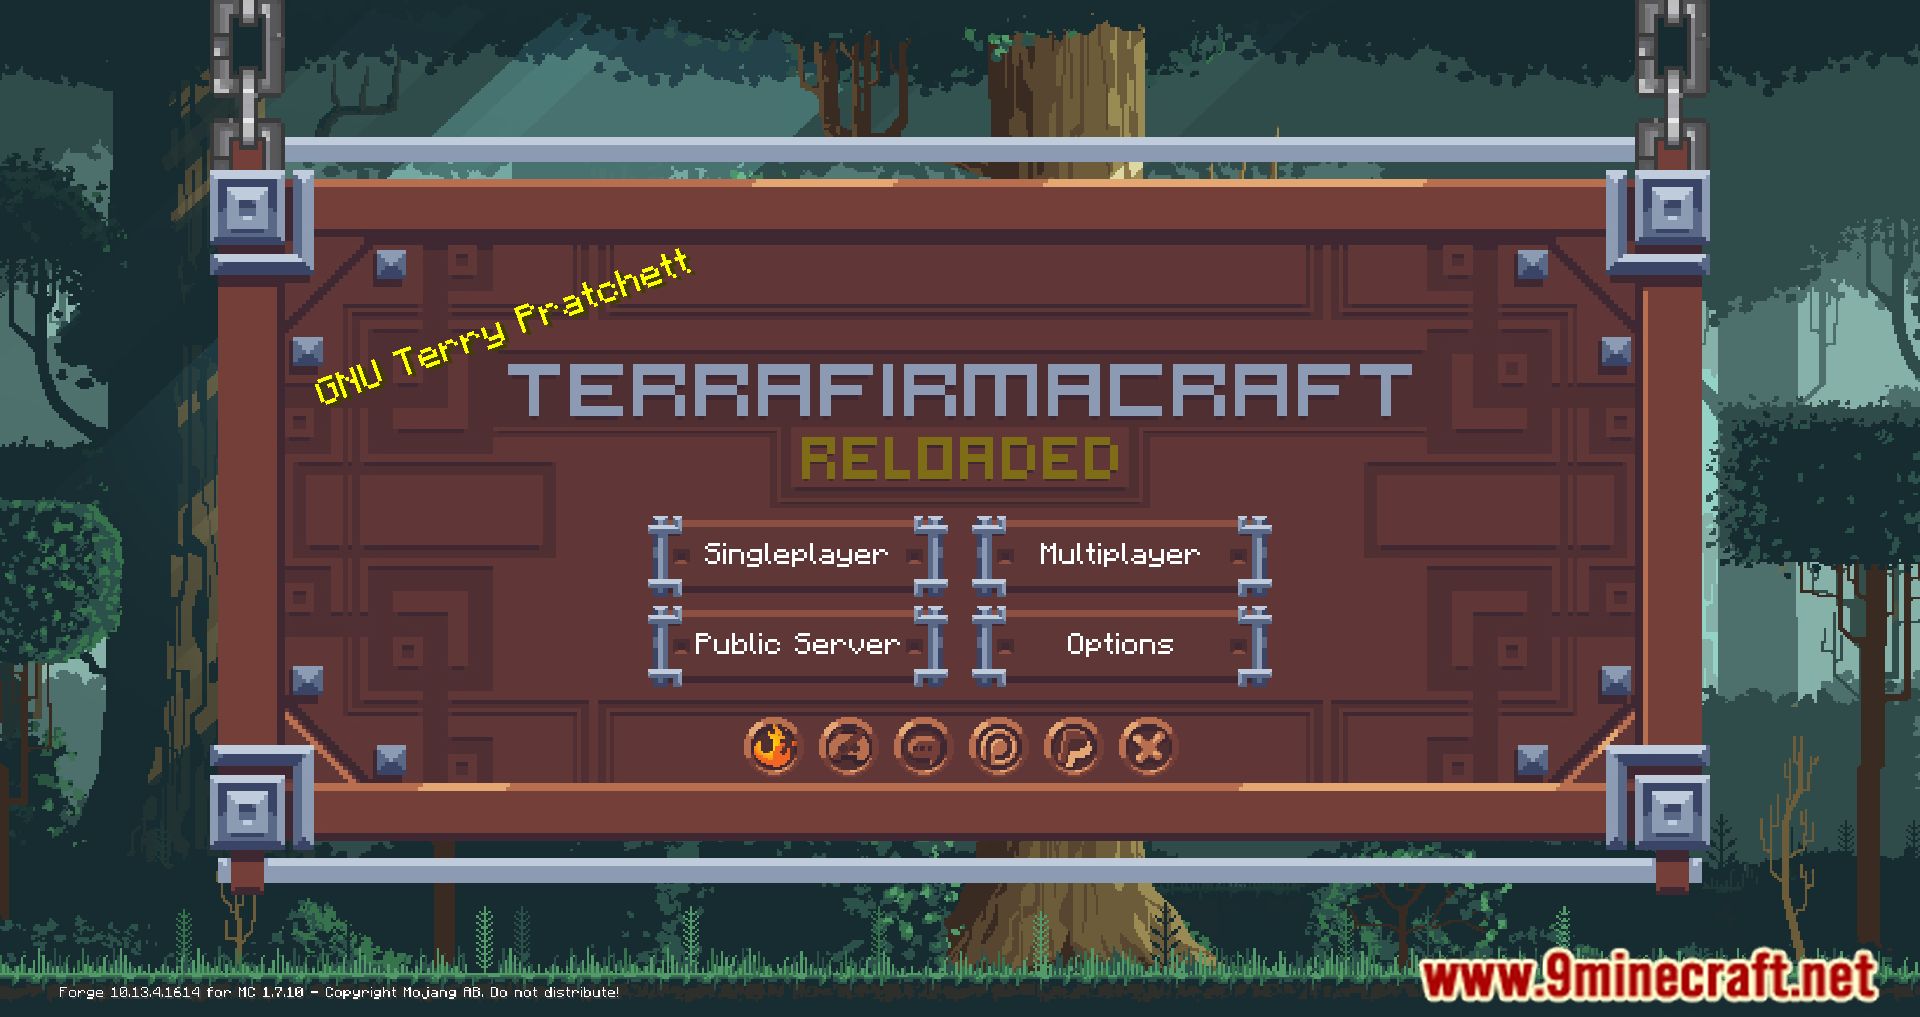 TerraFirmaCraft Reloaded Modpack (1.7.10) - From The Stone Ages To The Modern Times 2